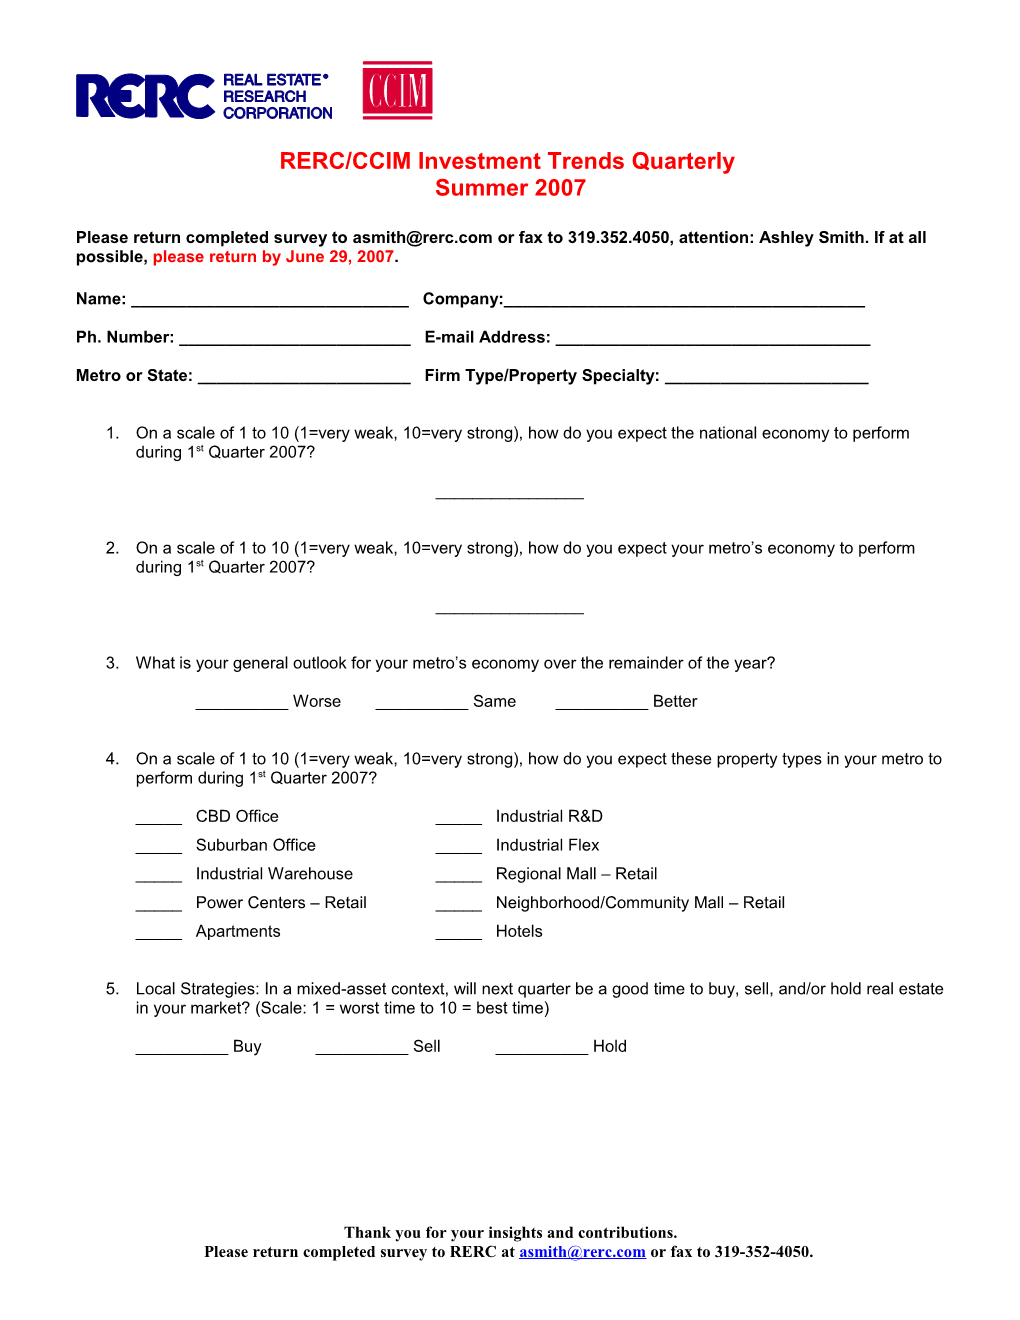 RERC Special New Orleans Investment Conditions Survey